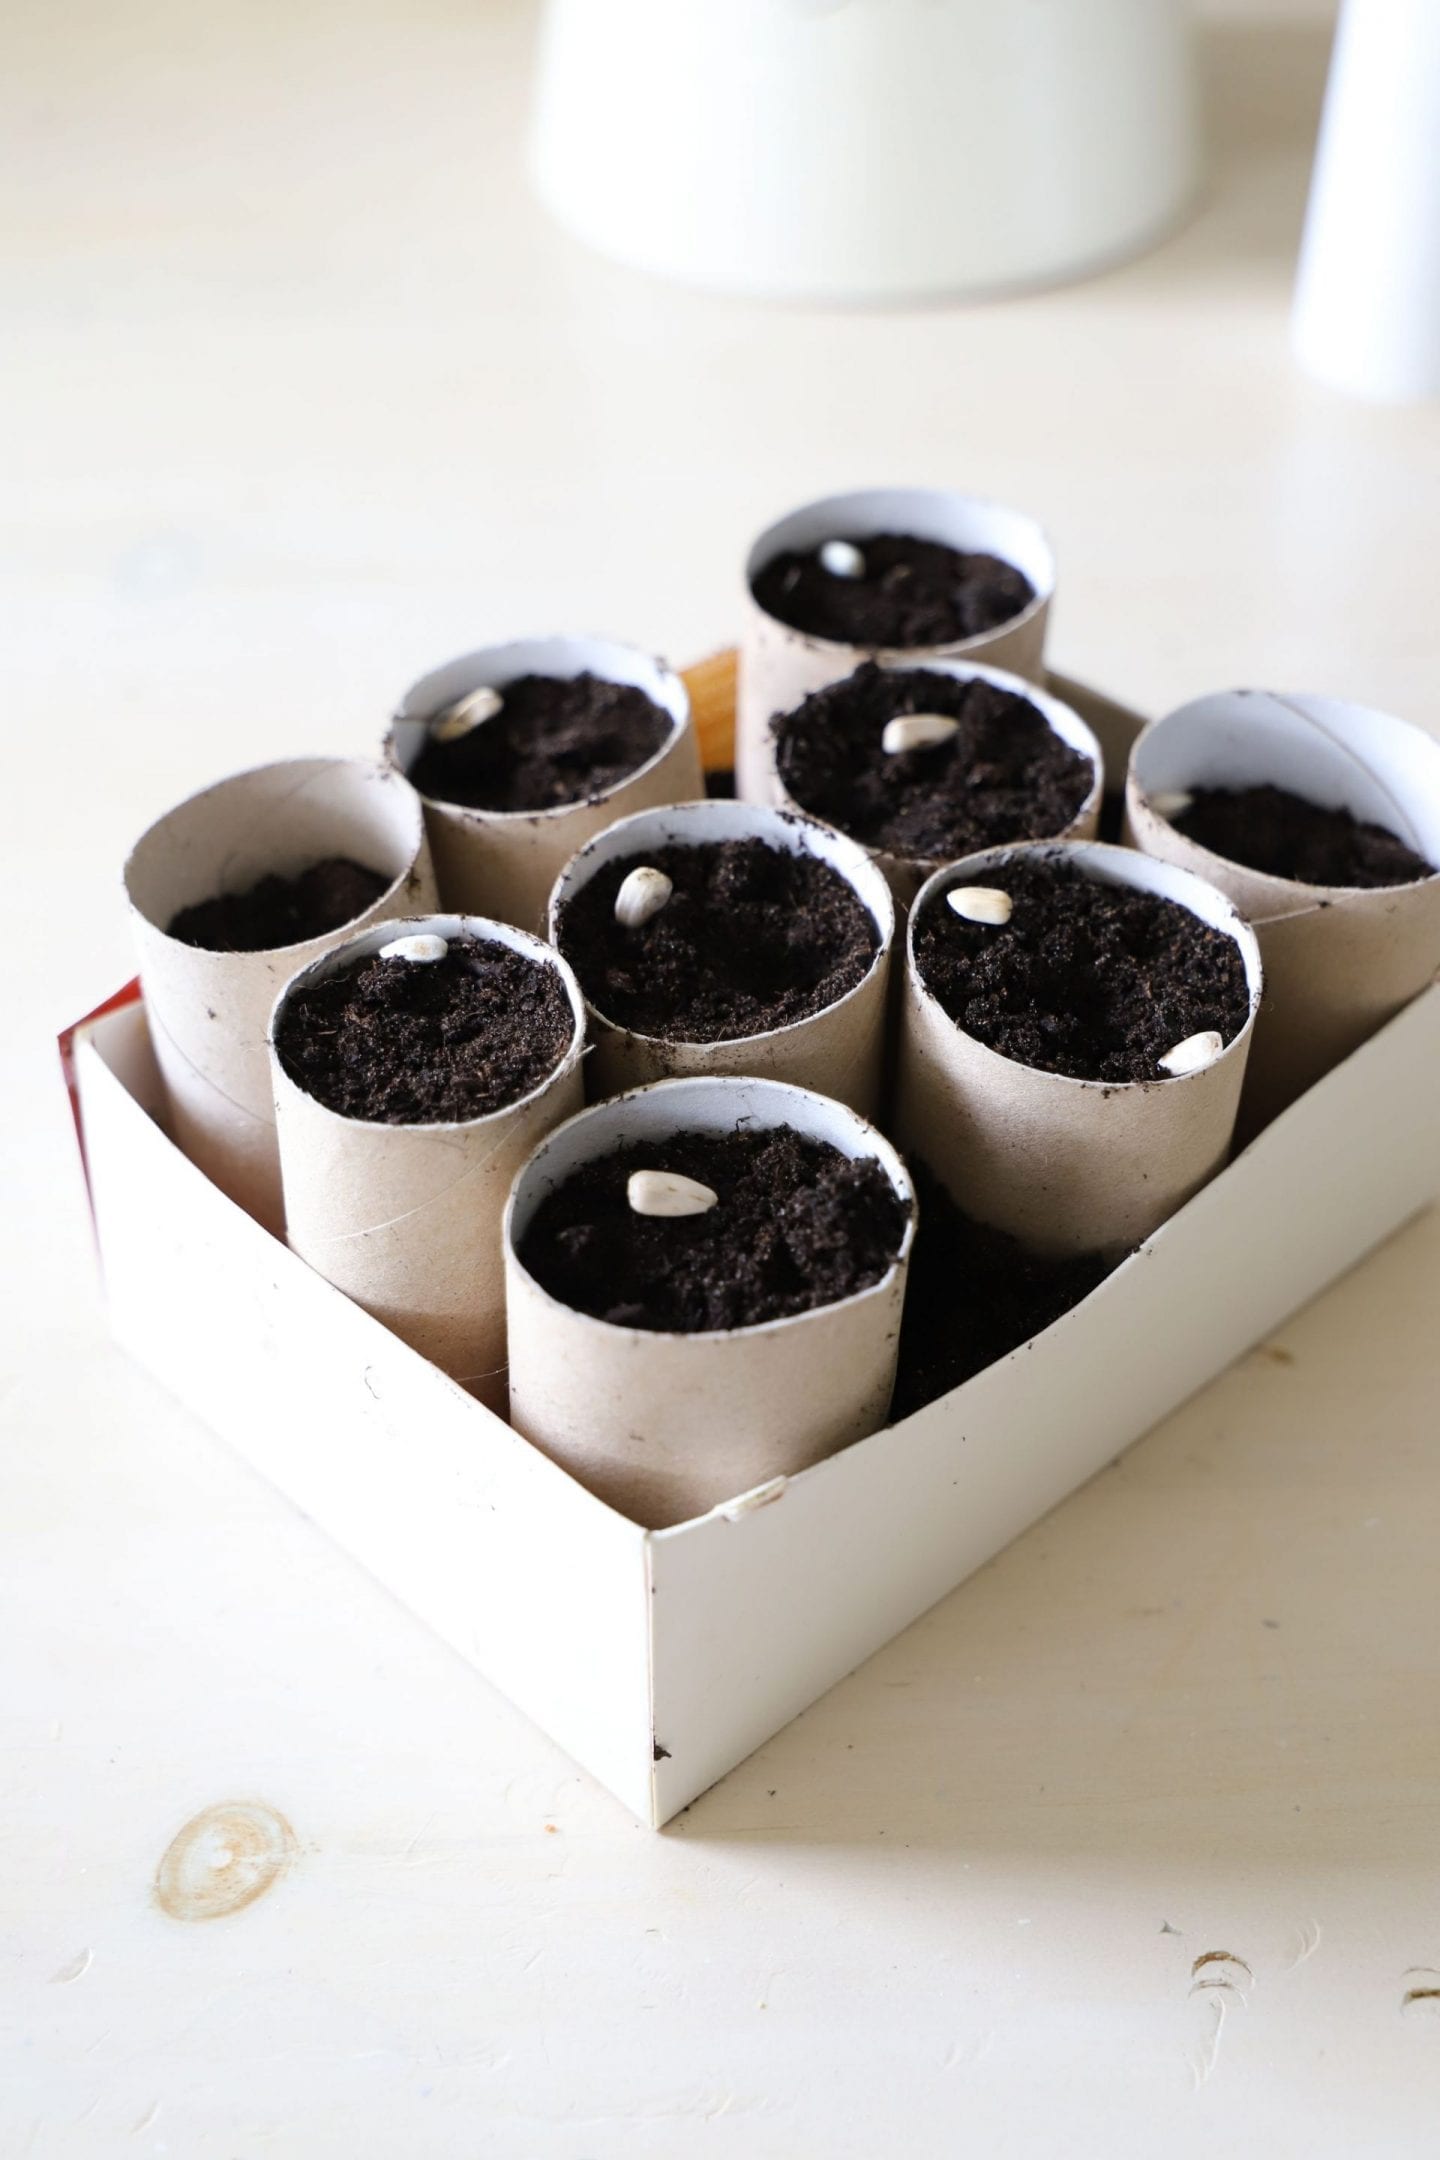 how to use toilet rolls for seeds